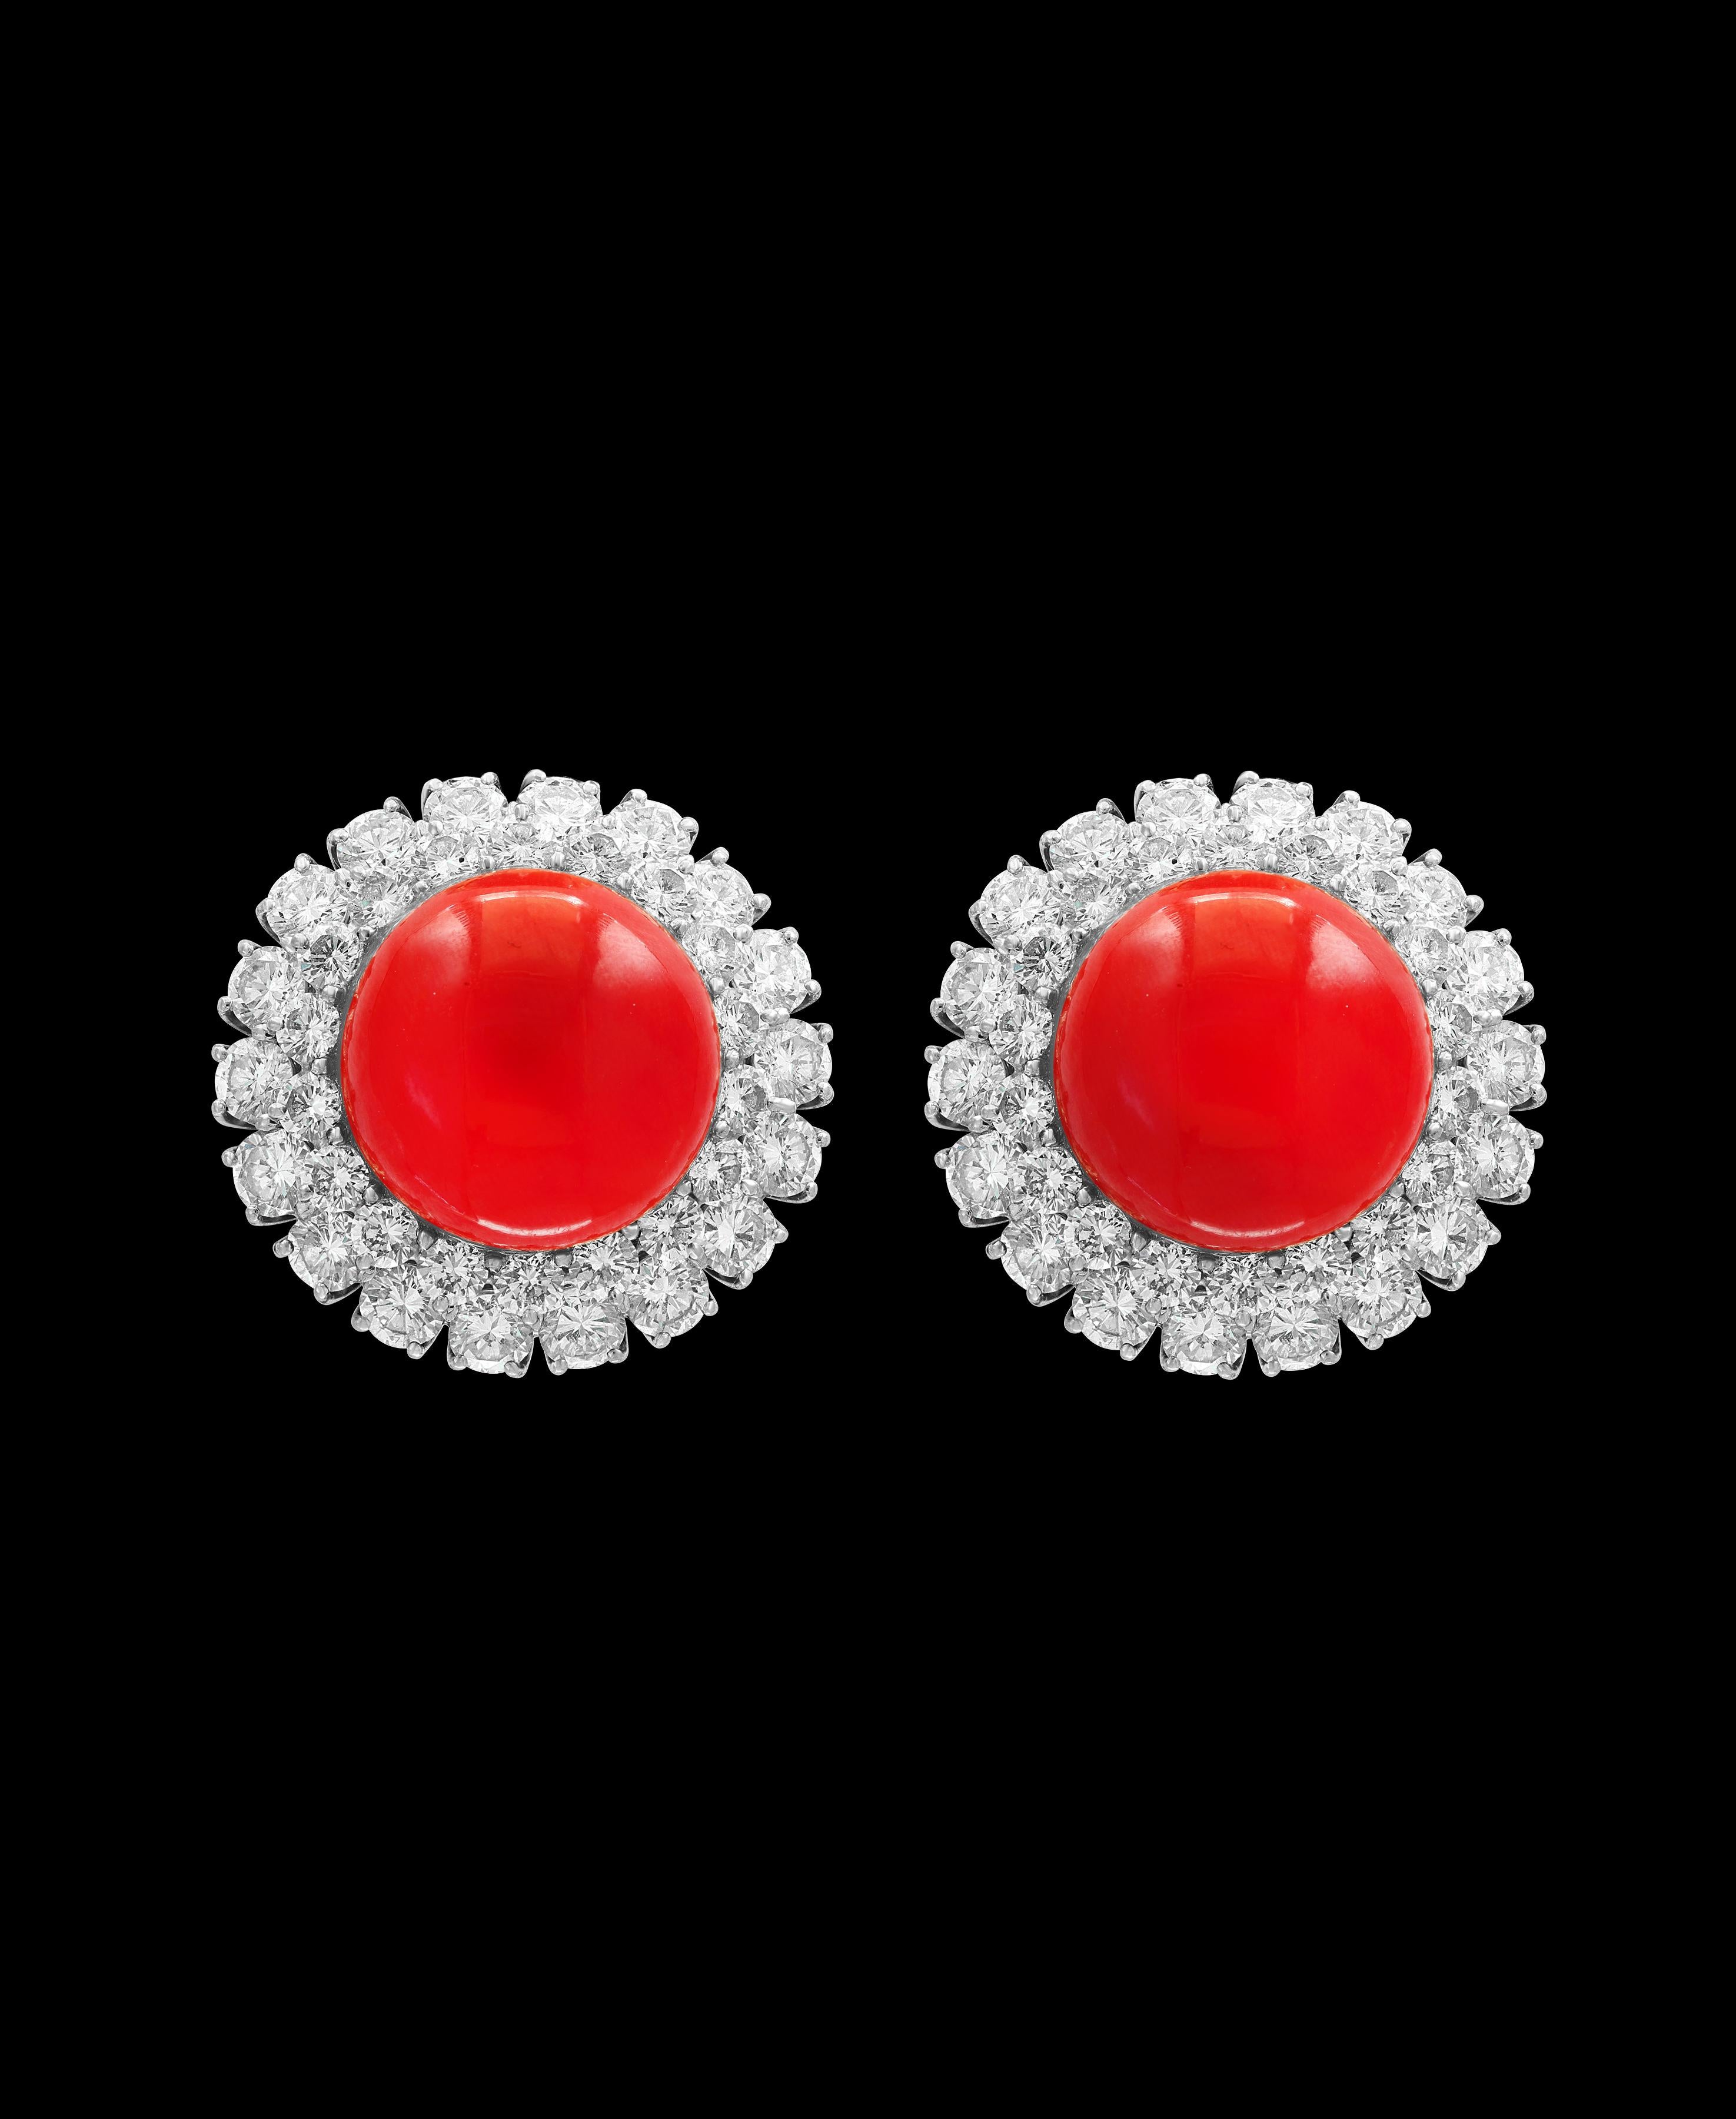 35 Carat Natural Coral and 12 Carat DeBeers Diamond Cocktail Earring in Platinum For Sale 3